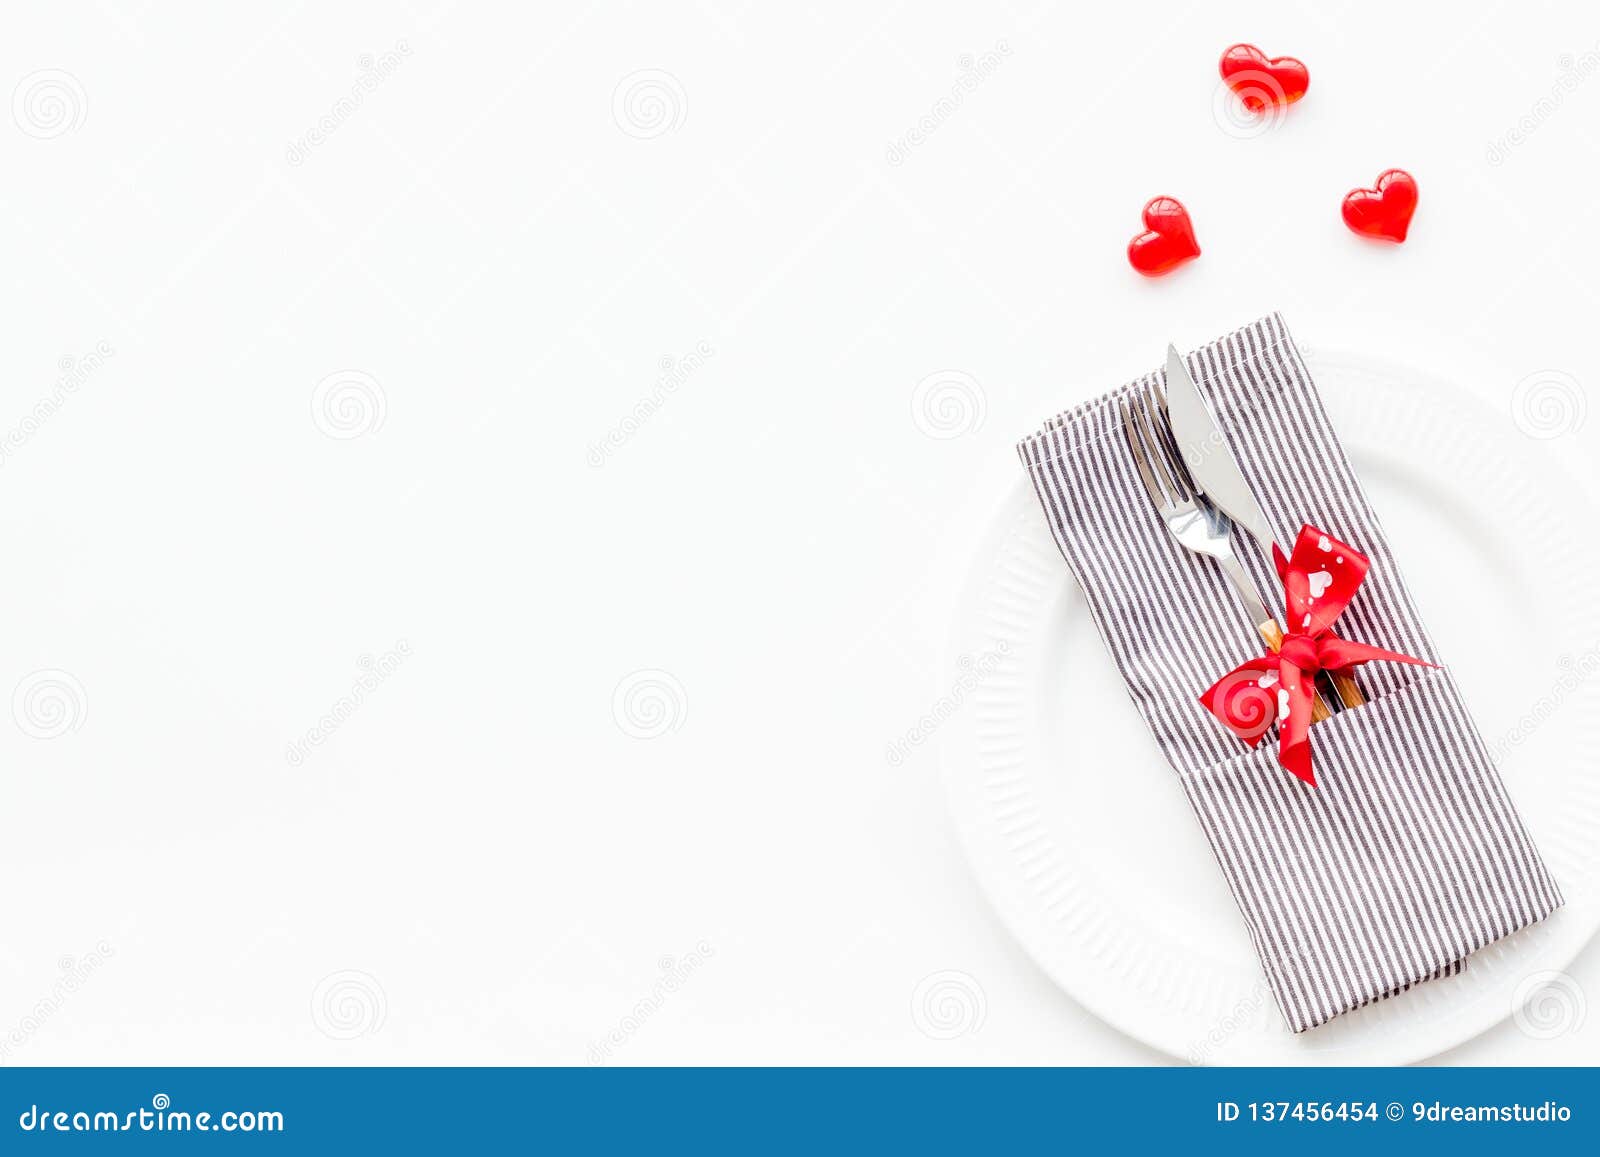 Romantic Dinner on Valentine`s Day Concept. Decorated Dishes, Tableware ...